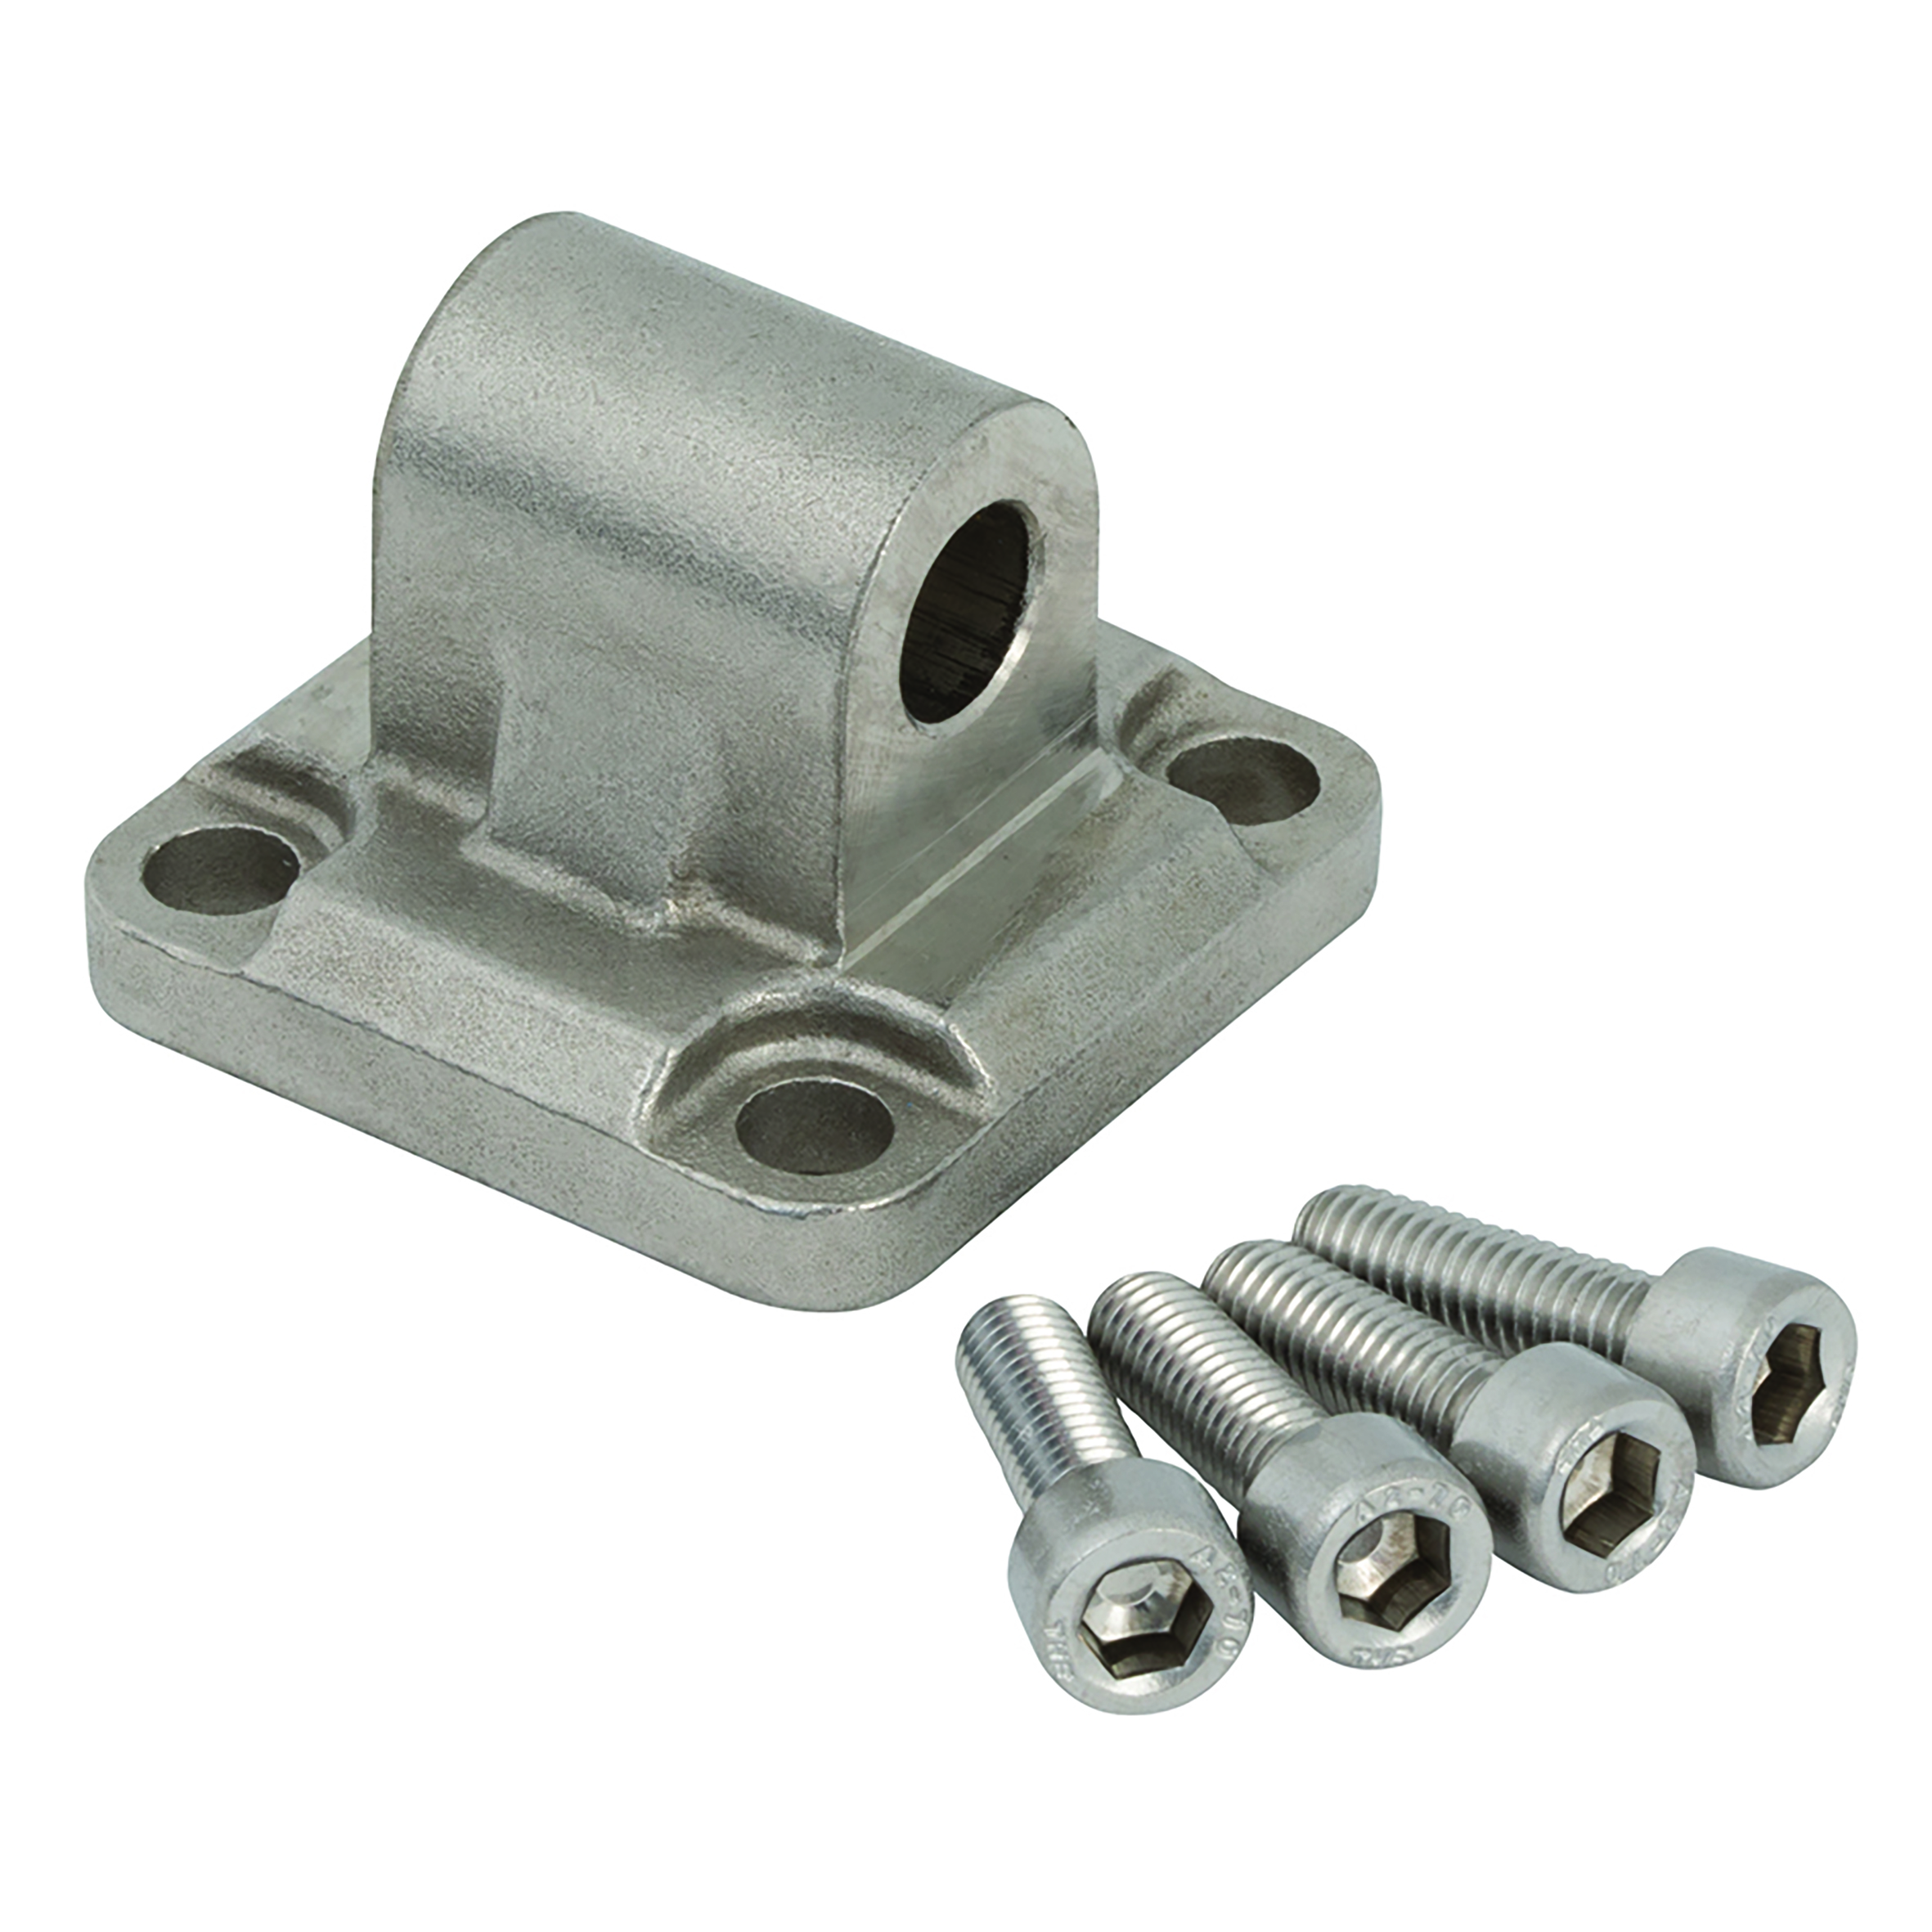 S/S MALE HINGE FOR 100MM DIA. CYLINDERS